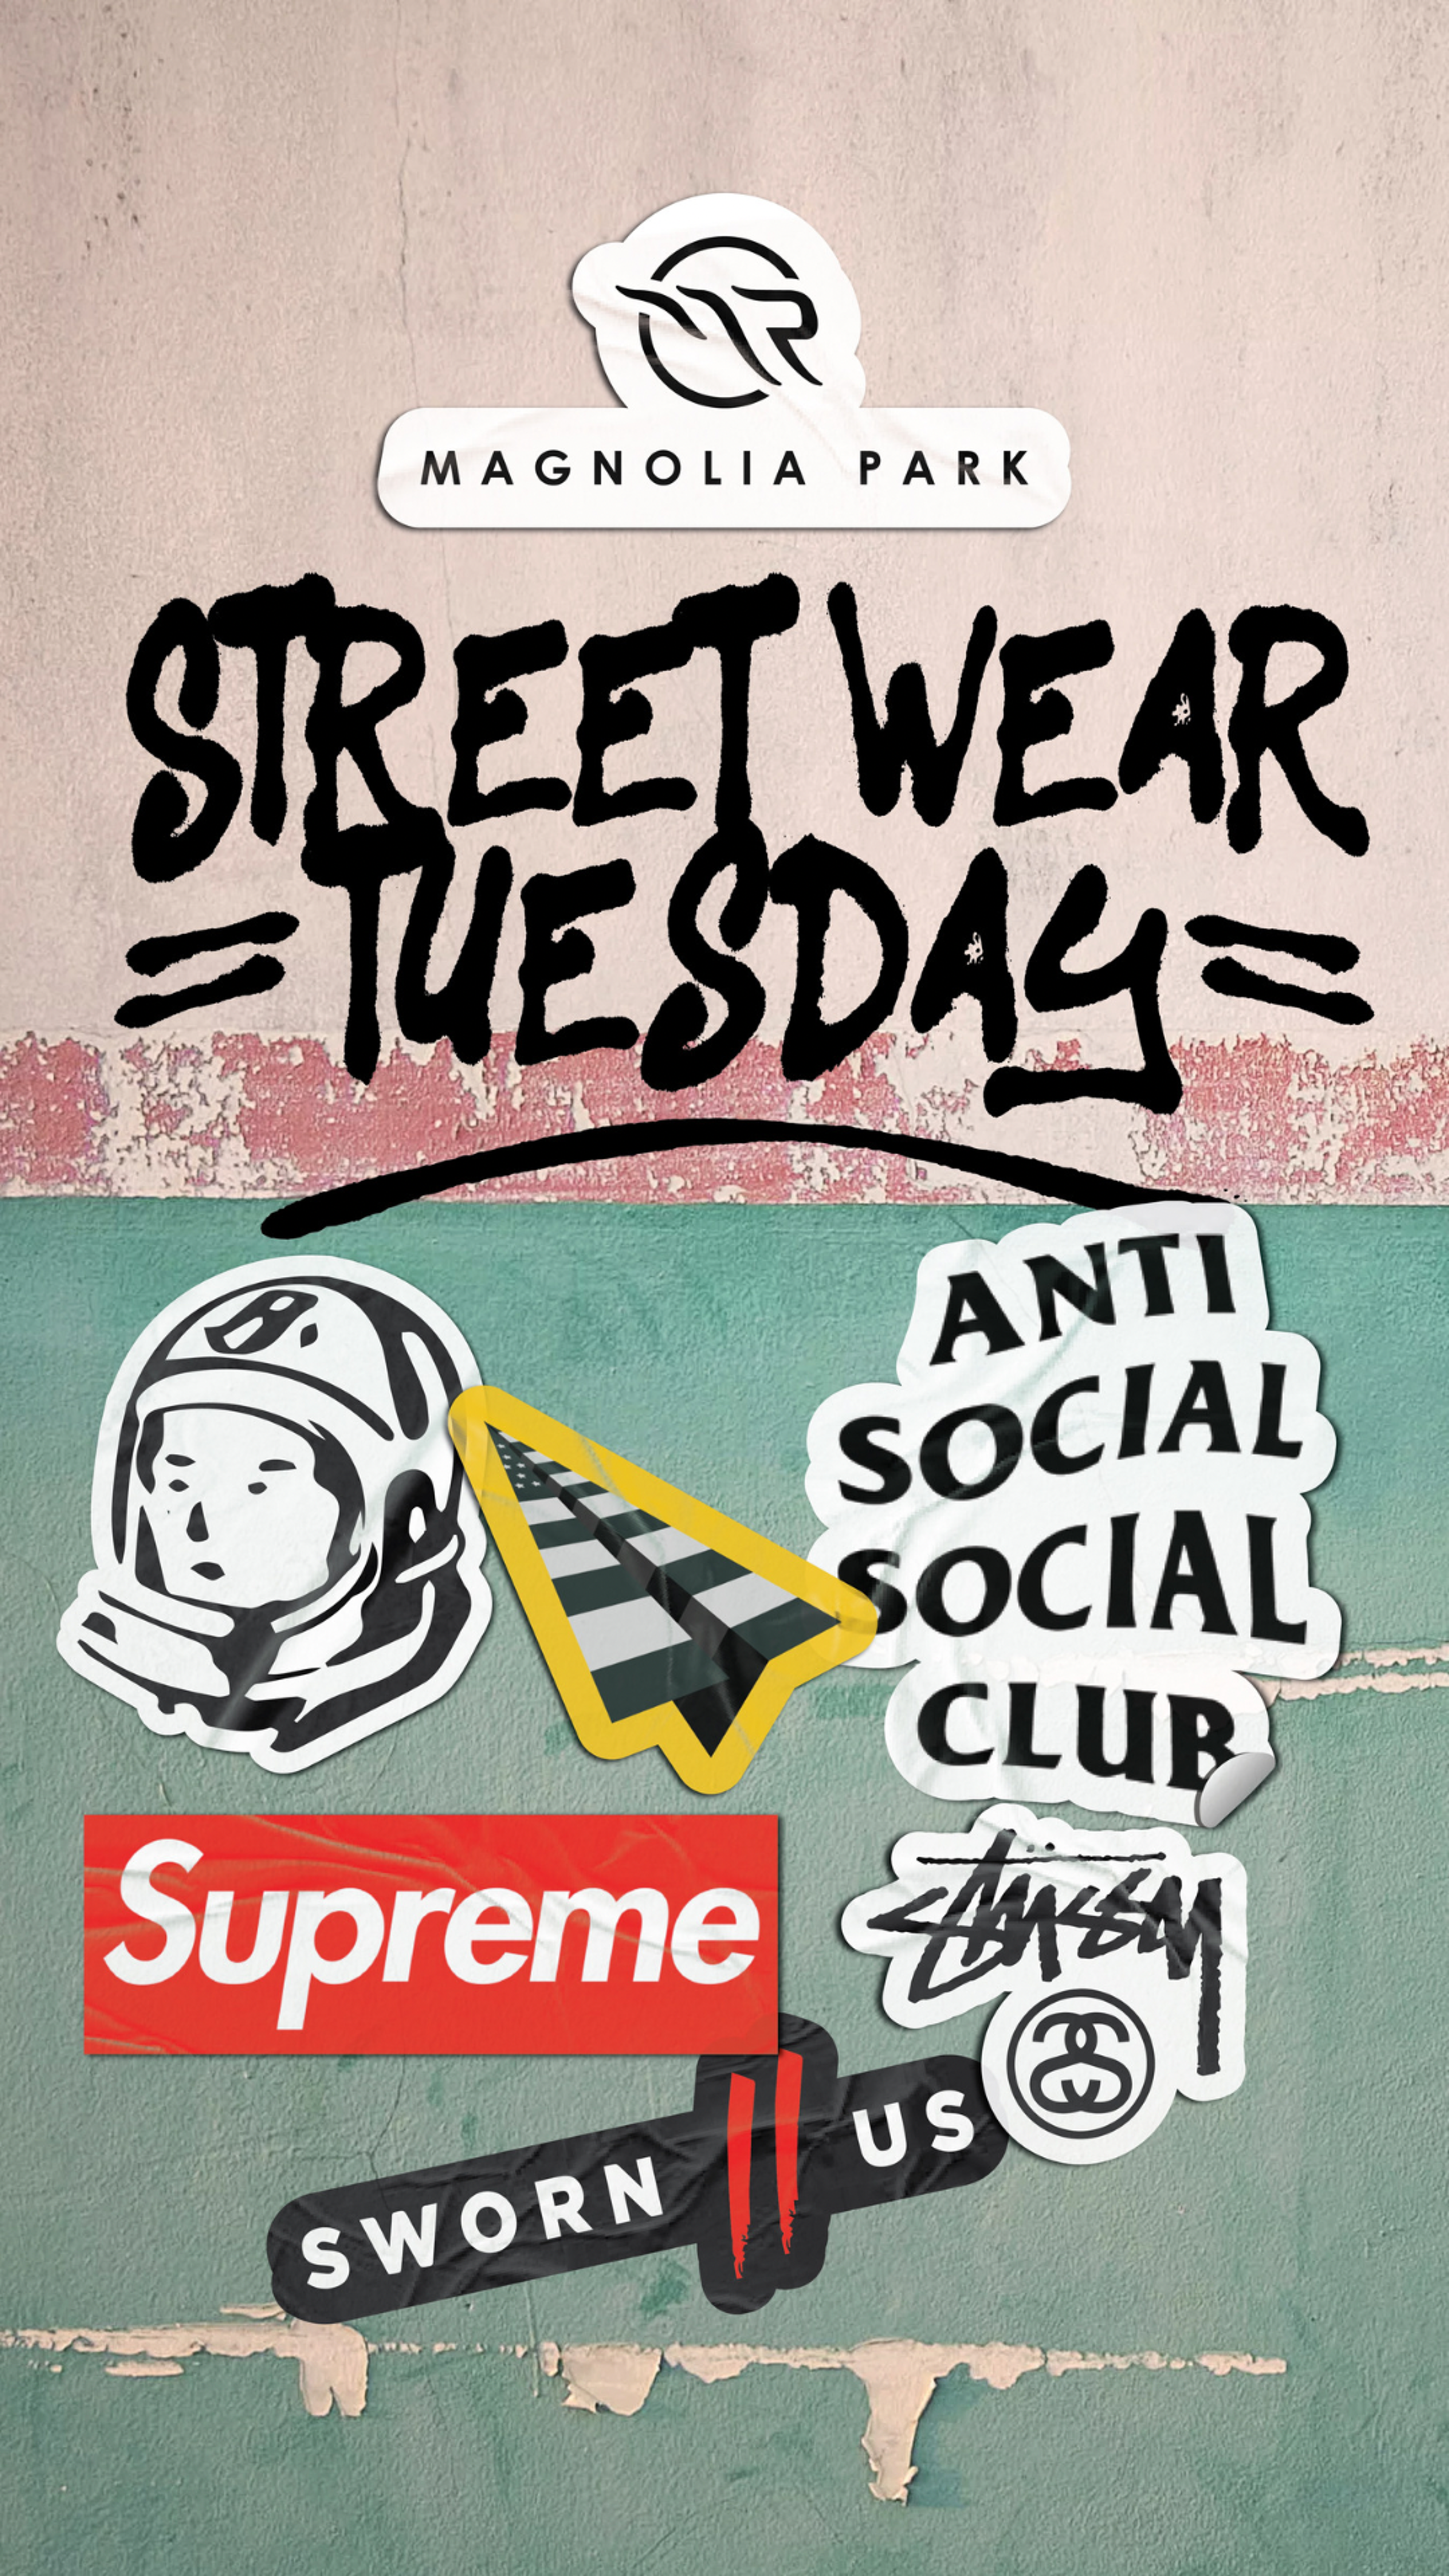 Preview image for the show titled "Streetwear Tuesday - Supreme, BBC, Ice Cream & More! " at Today @ 4:00 PM